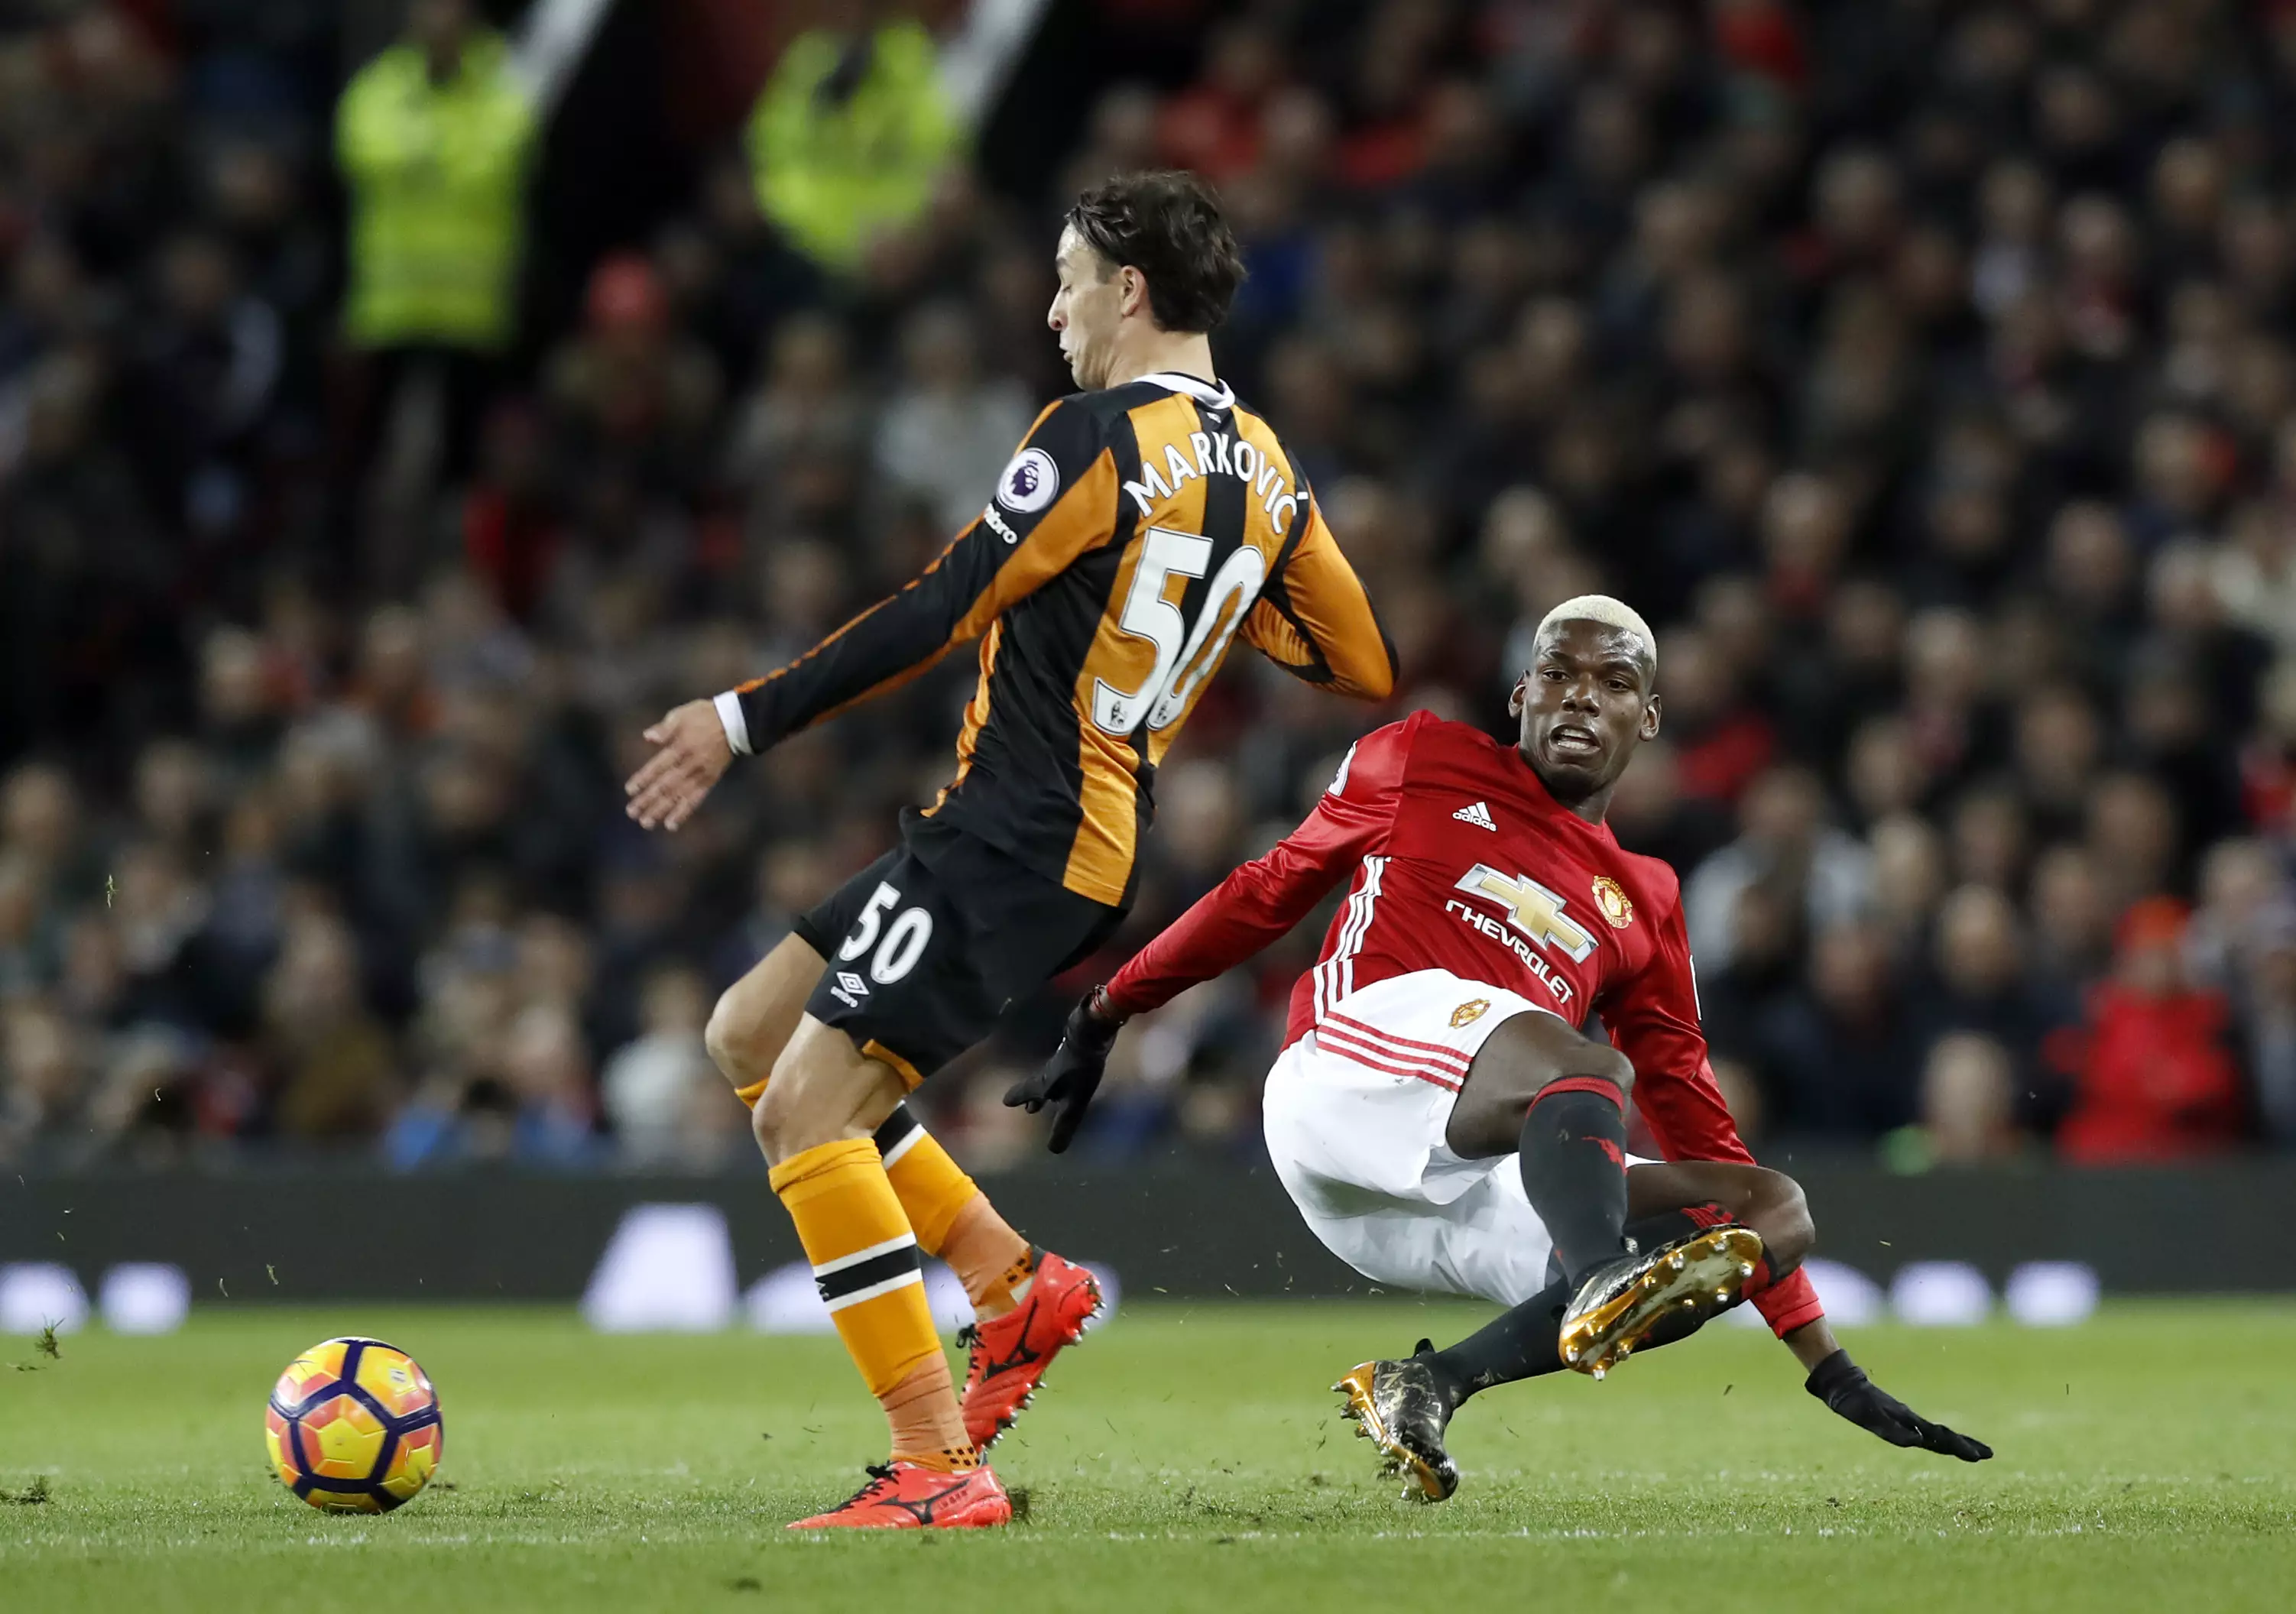 Markovic in action for Hull. Image: PA